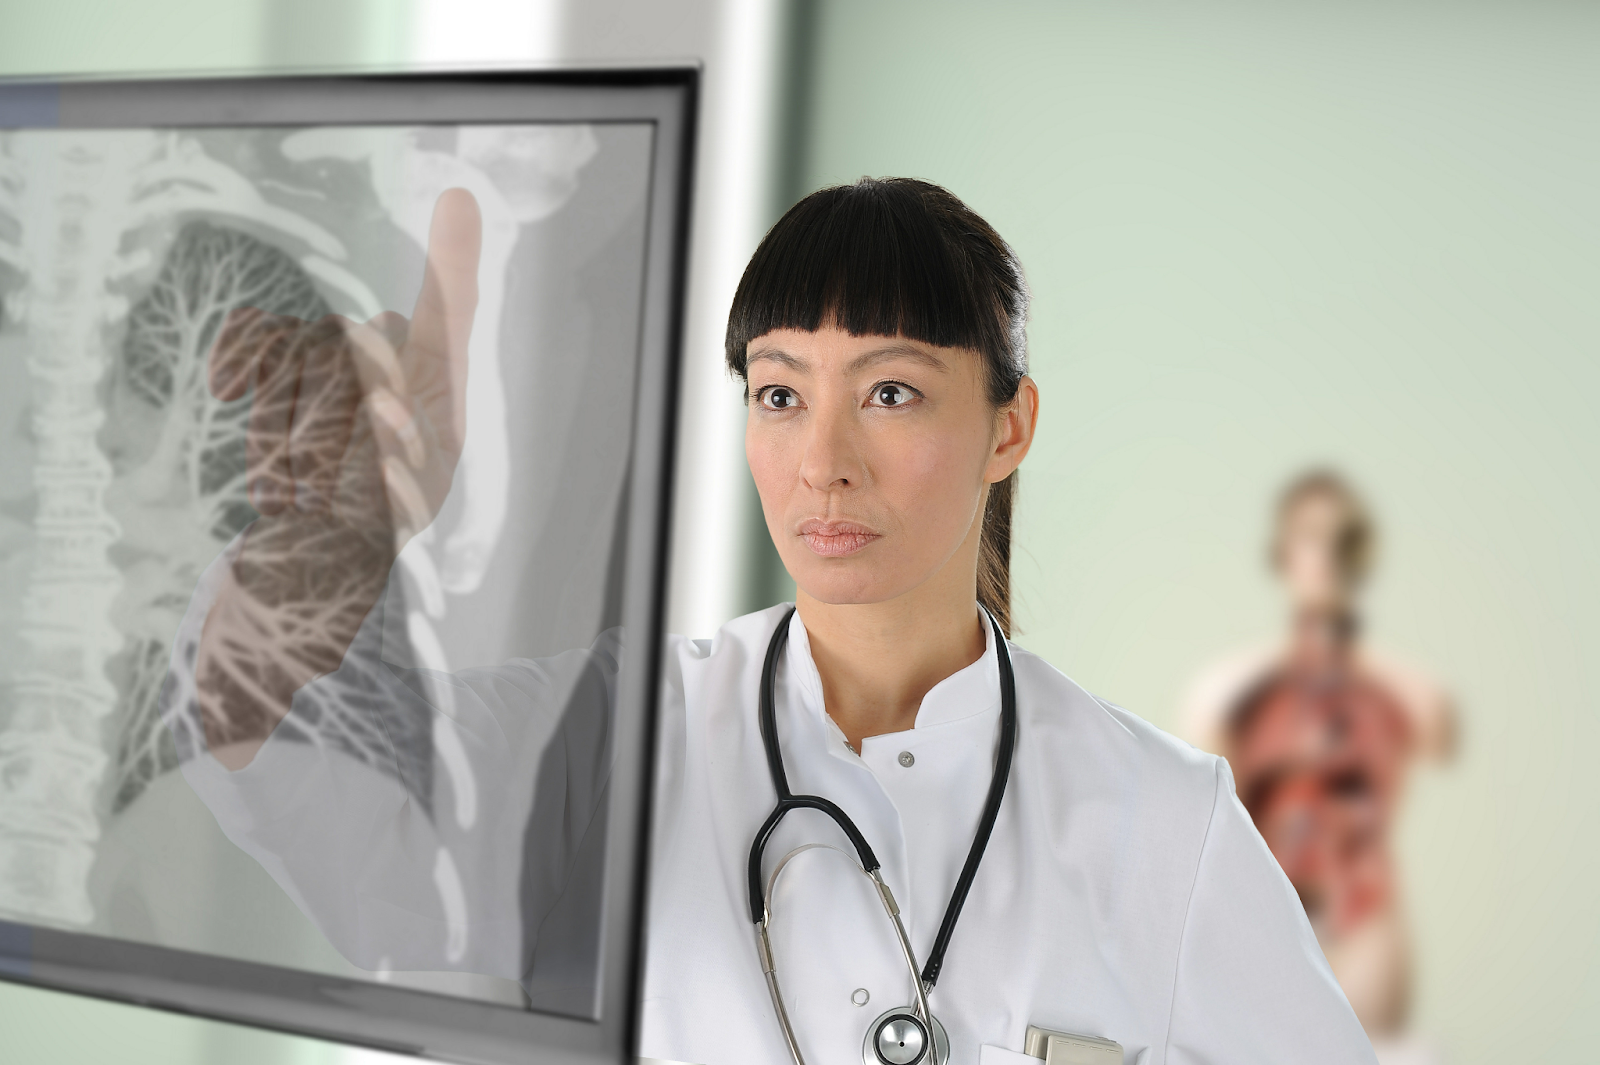 A doctor scrutinizes a chest image on a touchscreen display